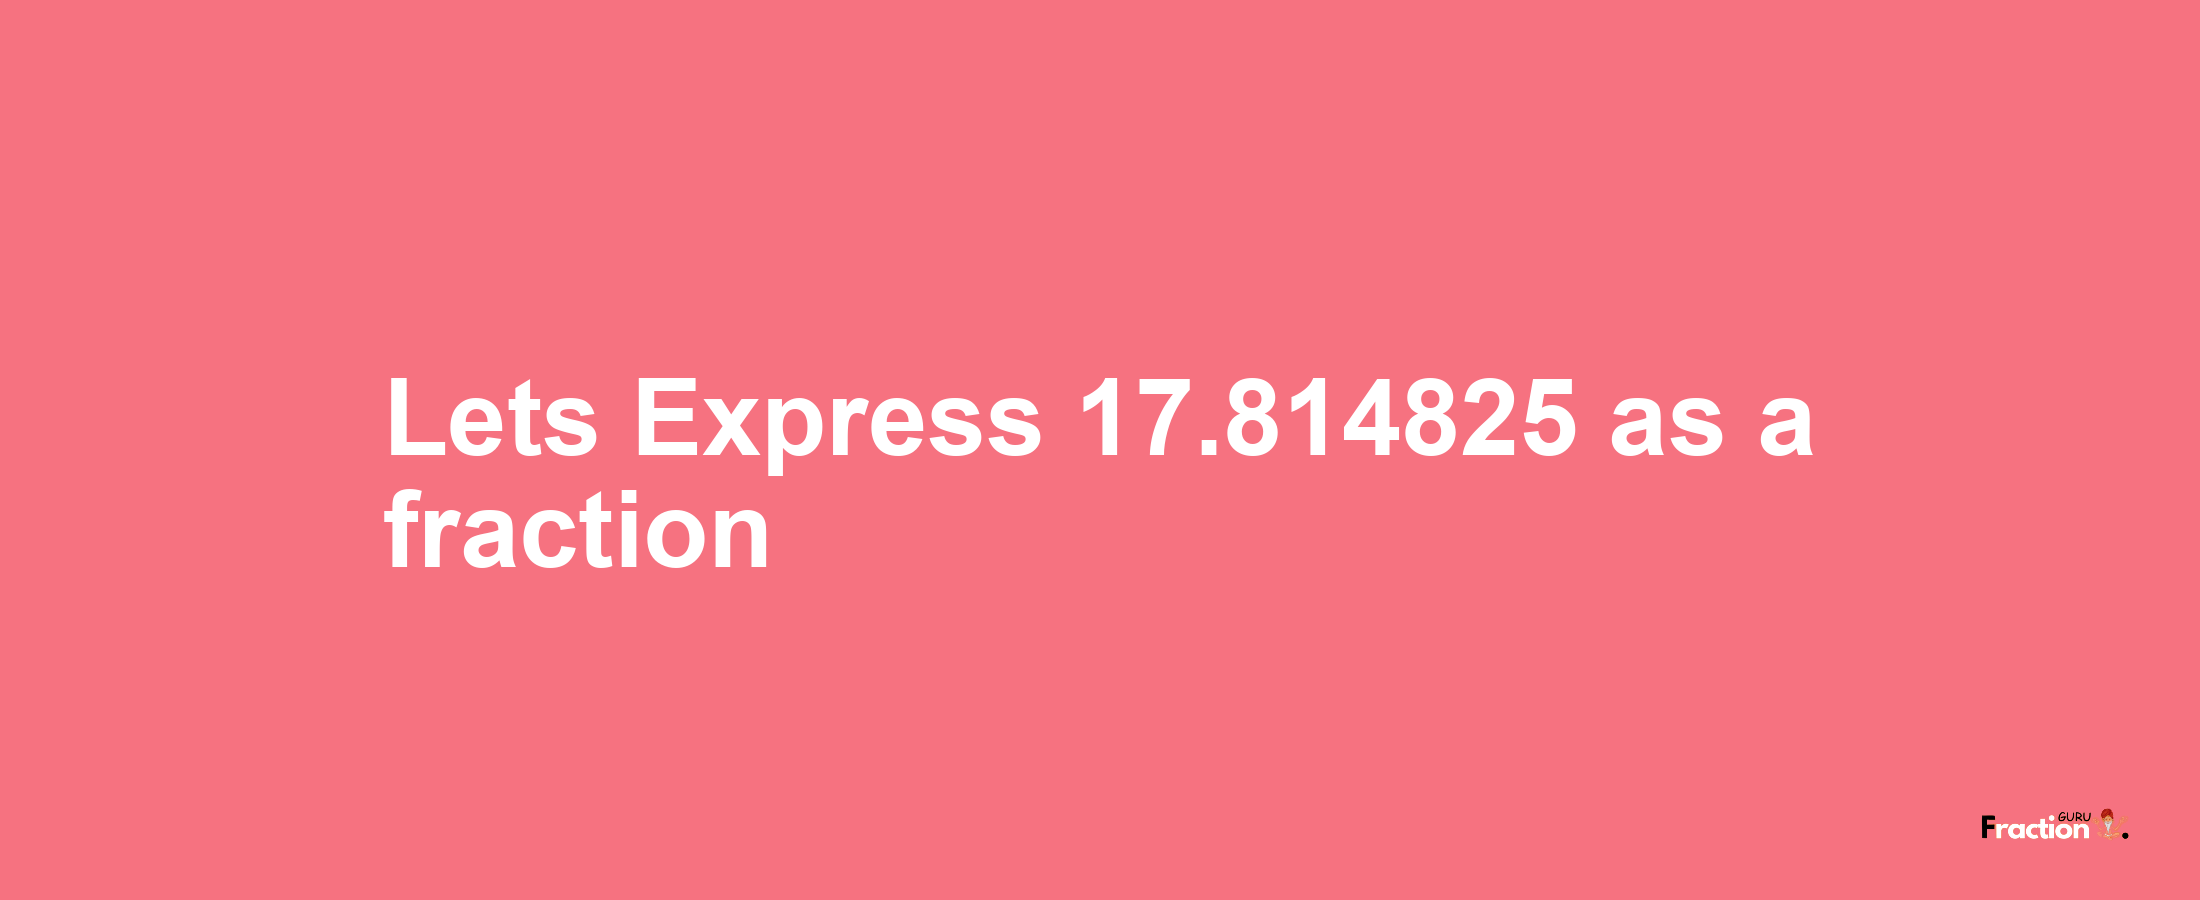 Lets Express 17.814825 as afraction